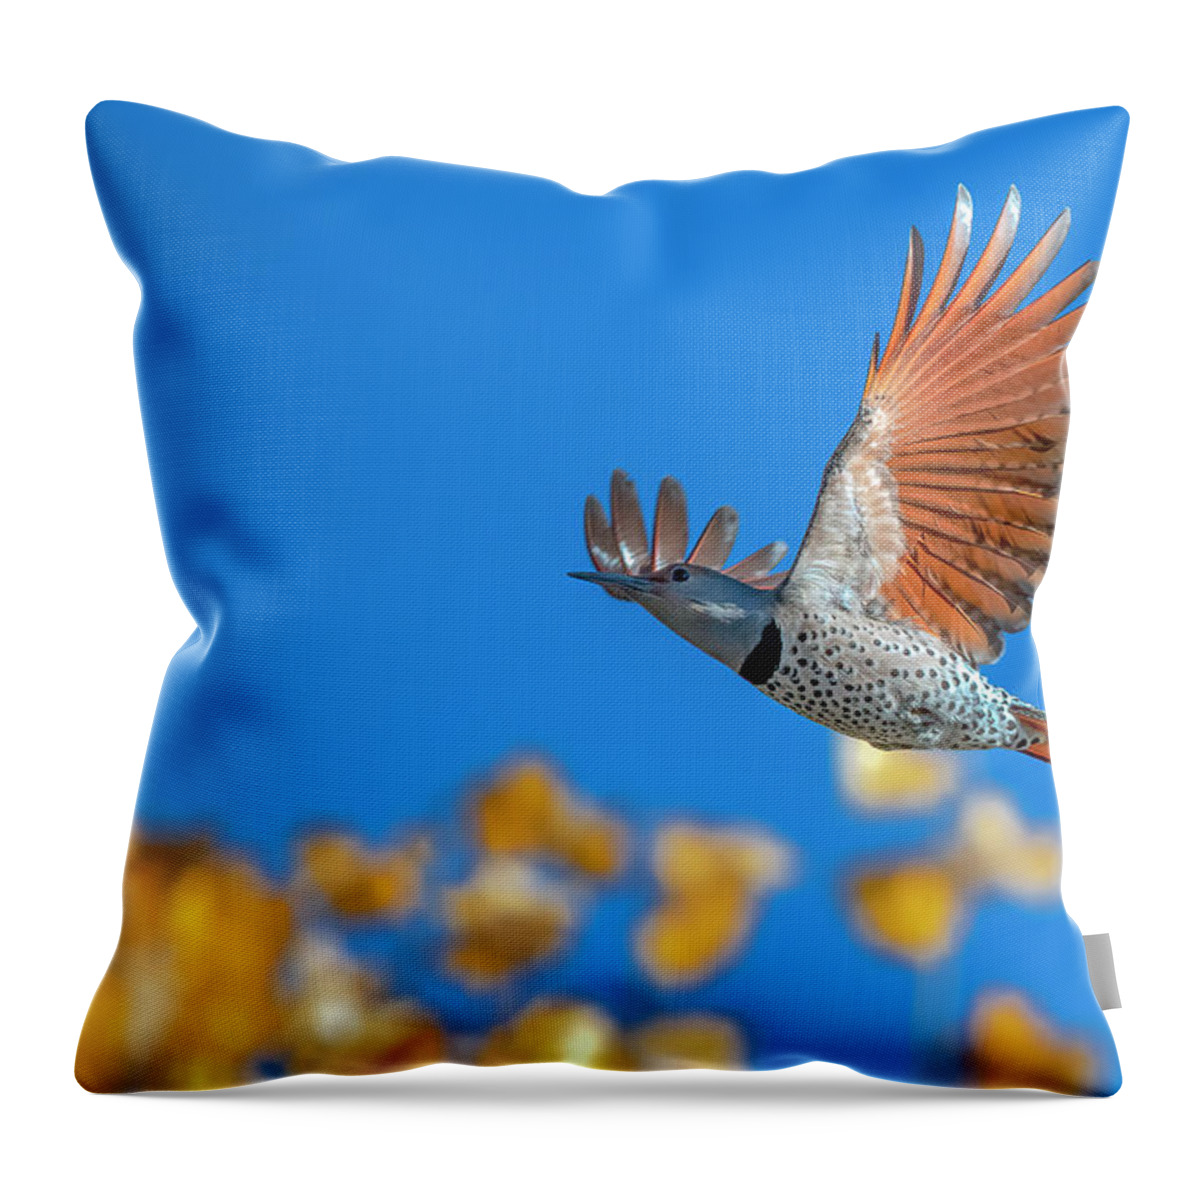 Flying Throw Pillow featuring the photograph Northern Flicker by Rick Mosher